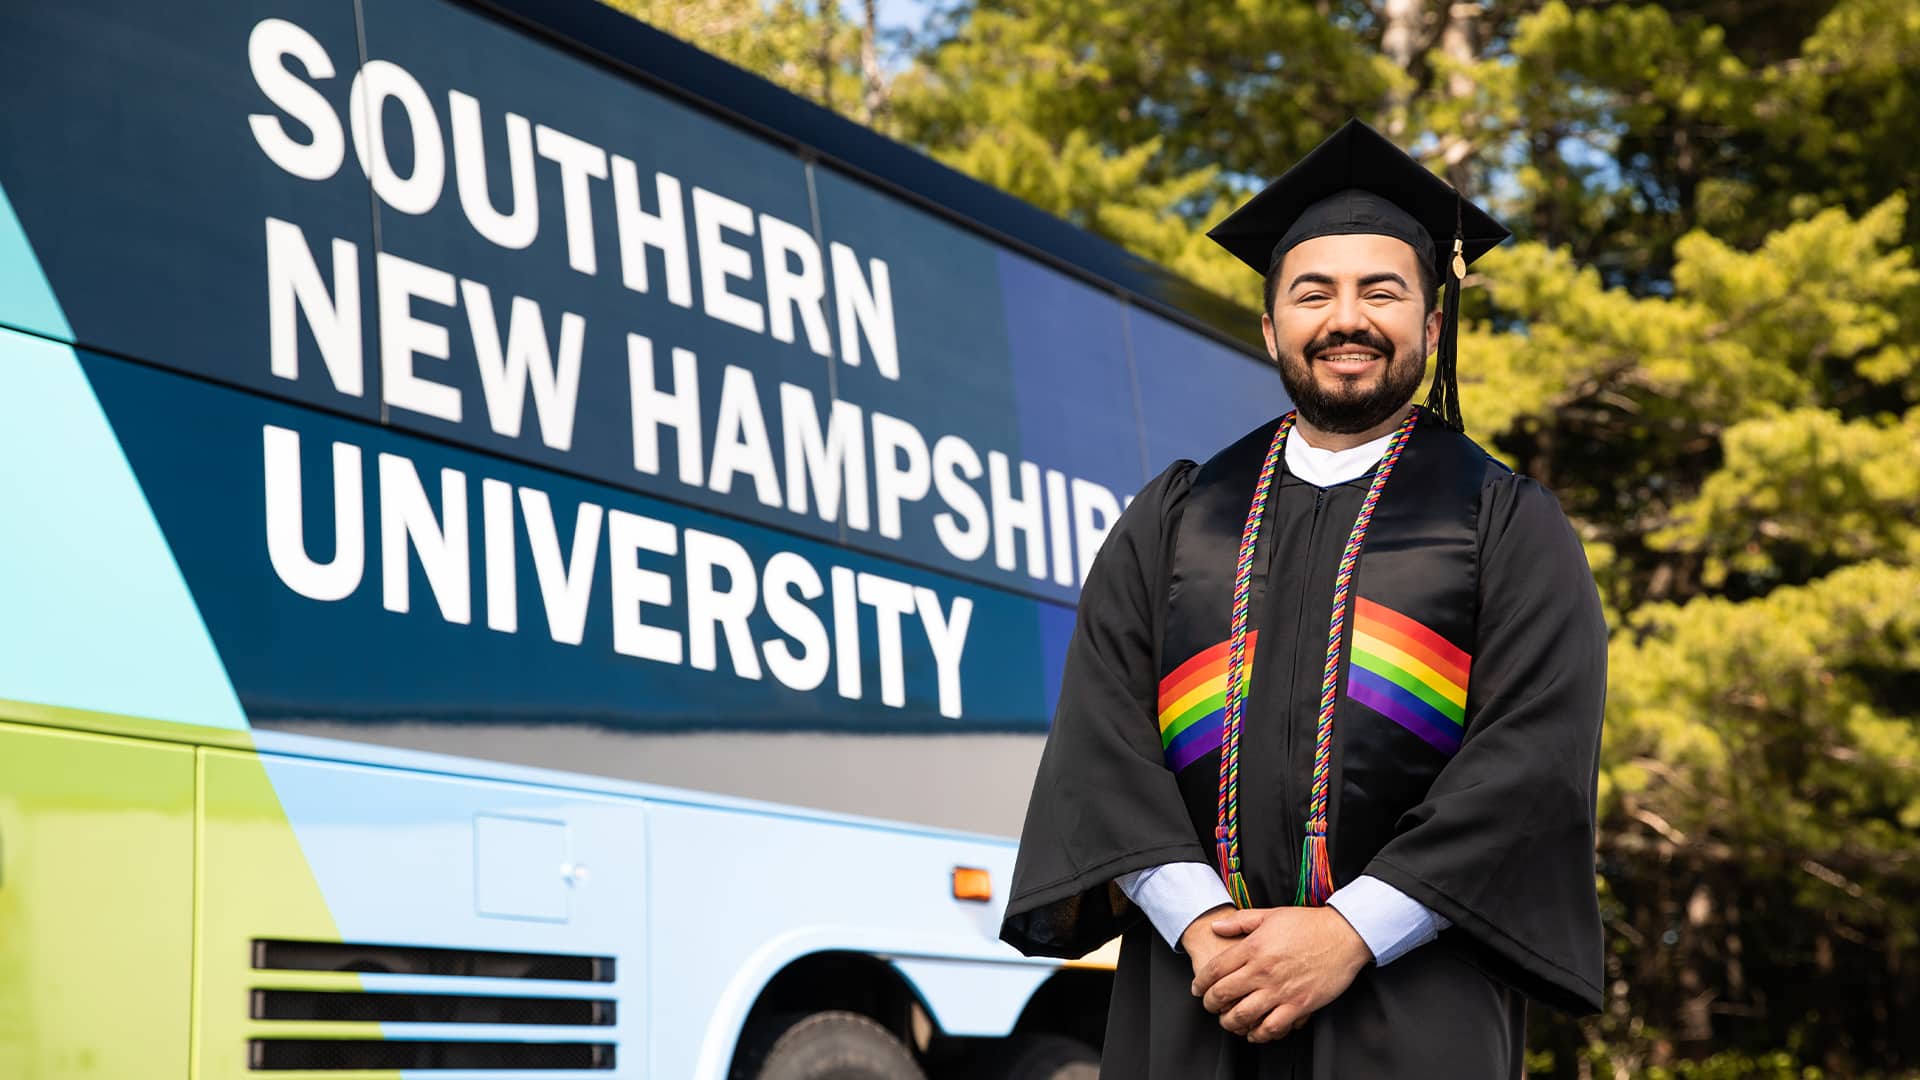 Jesús Súarez, who earned his degree from SNHU in 2021, wearing his cap and gown standing in front of the SNHU-branded bus.